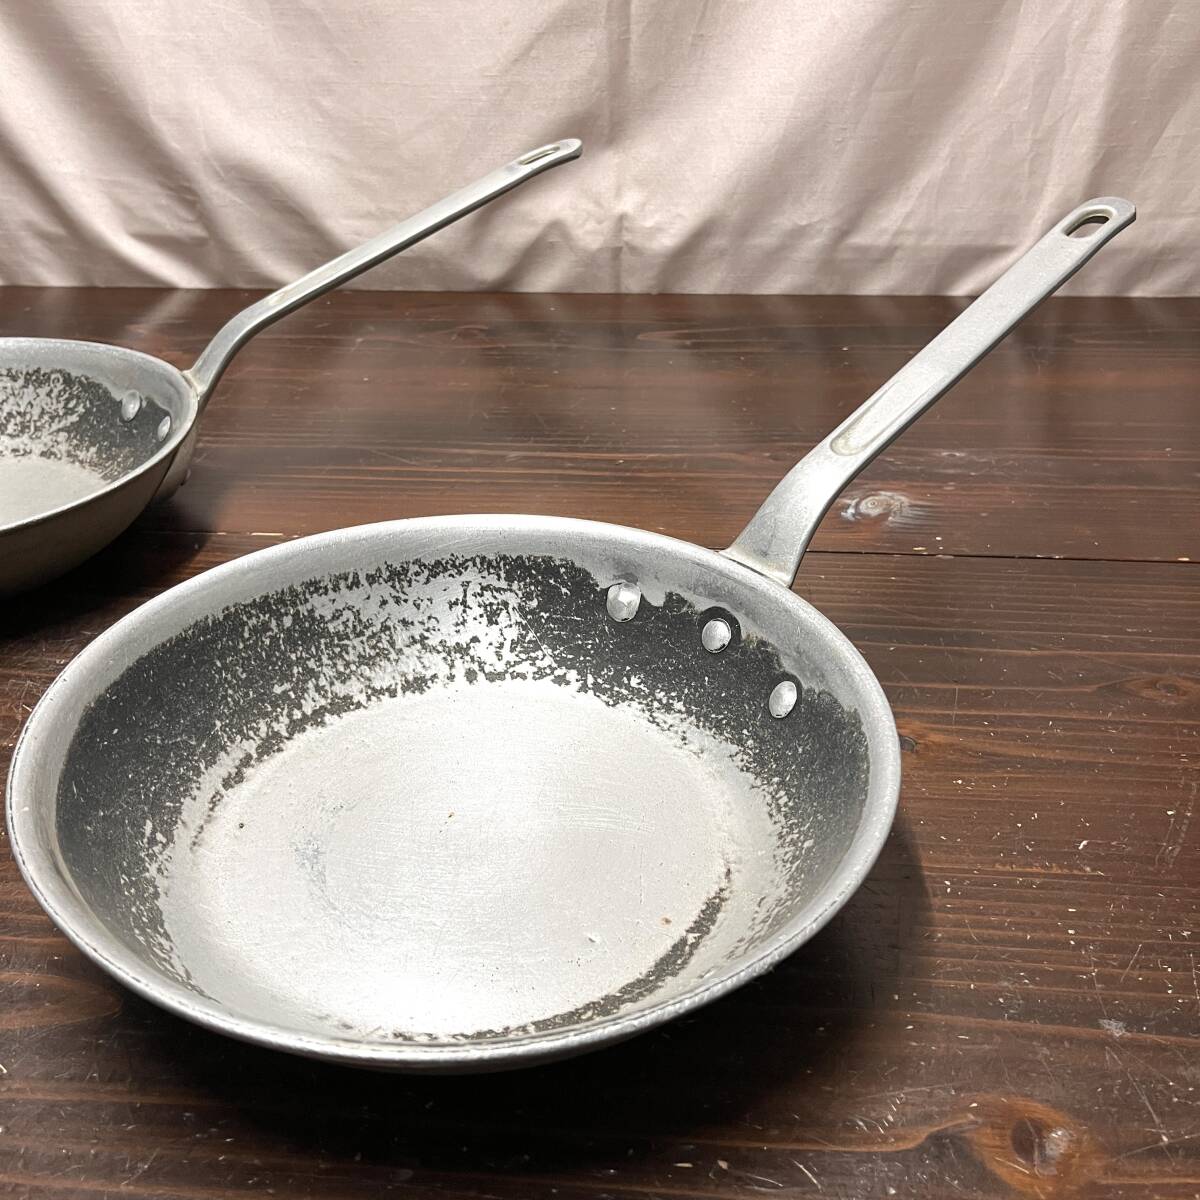  business use stainless steel fry pan single-handled pot 29cm 2 piece together eat and drink shop restaurant coffee shop (4289)